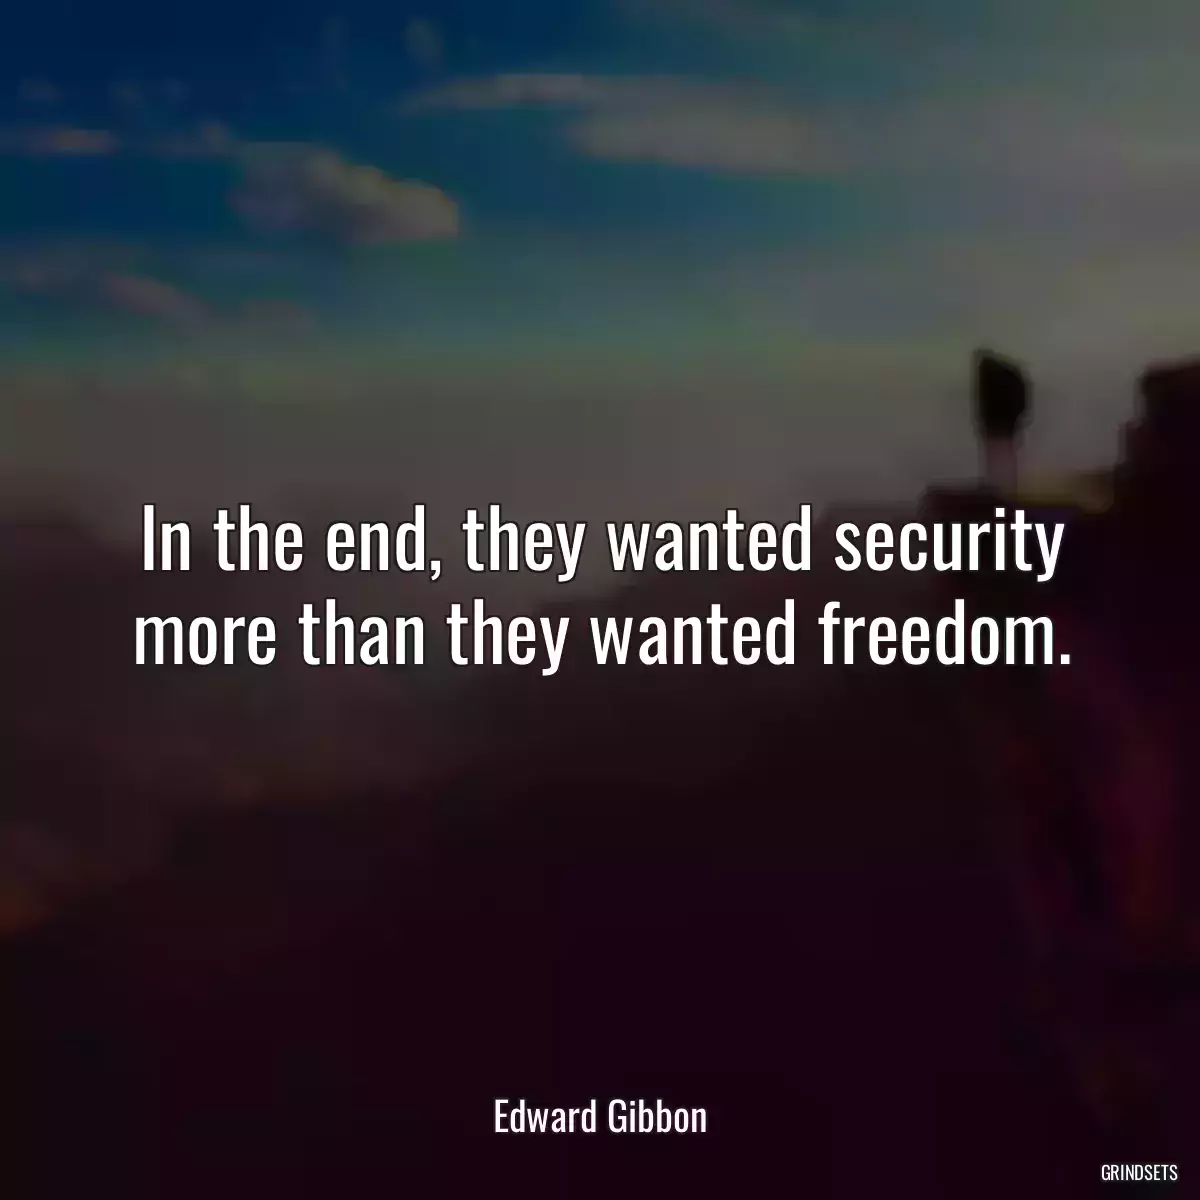 In the end, they wanted security more than they wanted freedom.